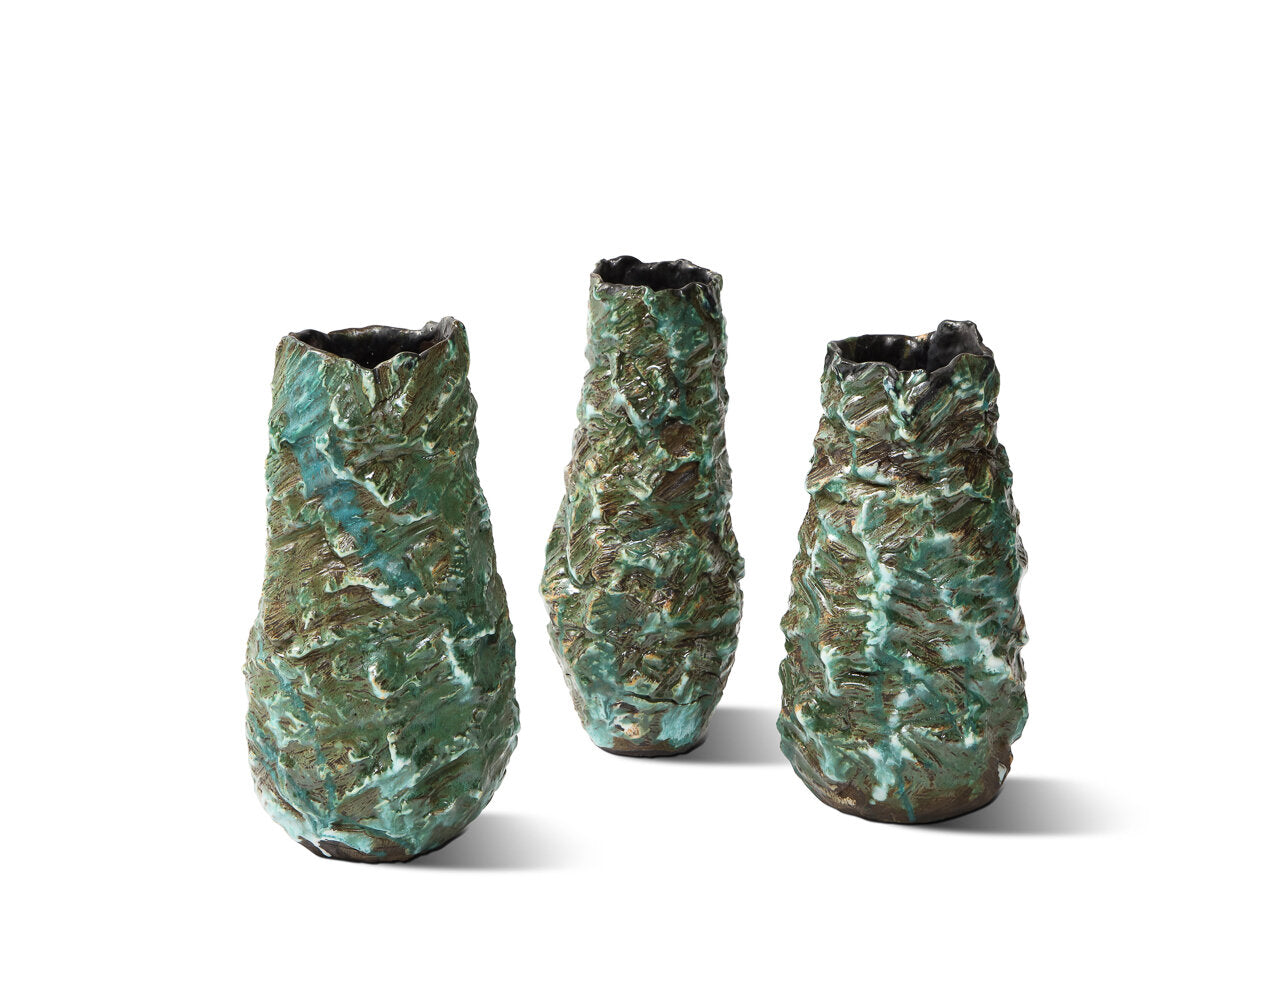 Trio of Cylindrical Vases with Black Interiors by Dena Zemsky